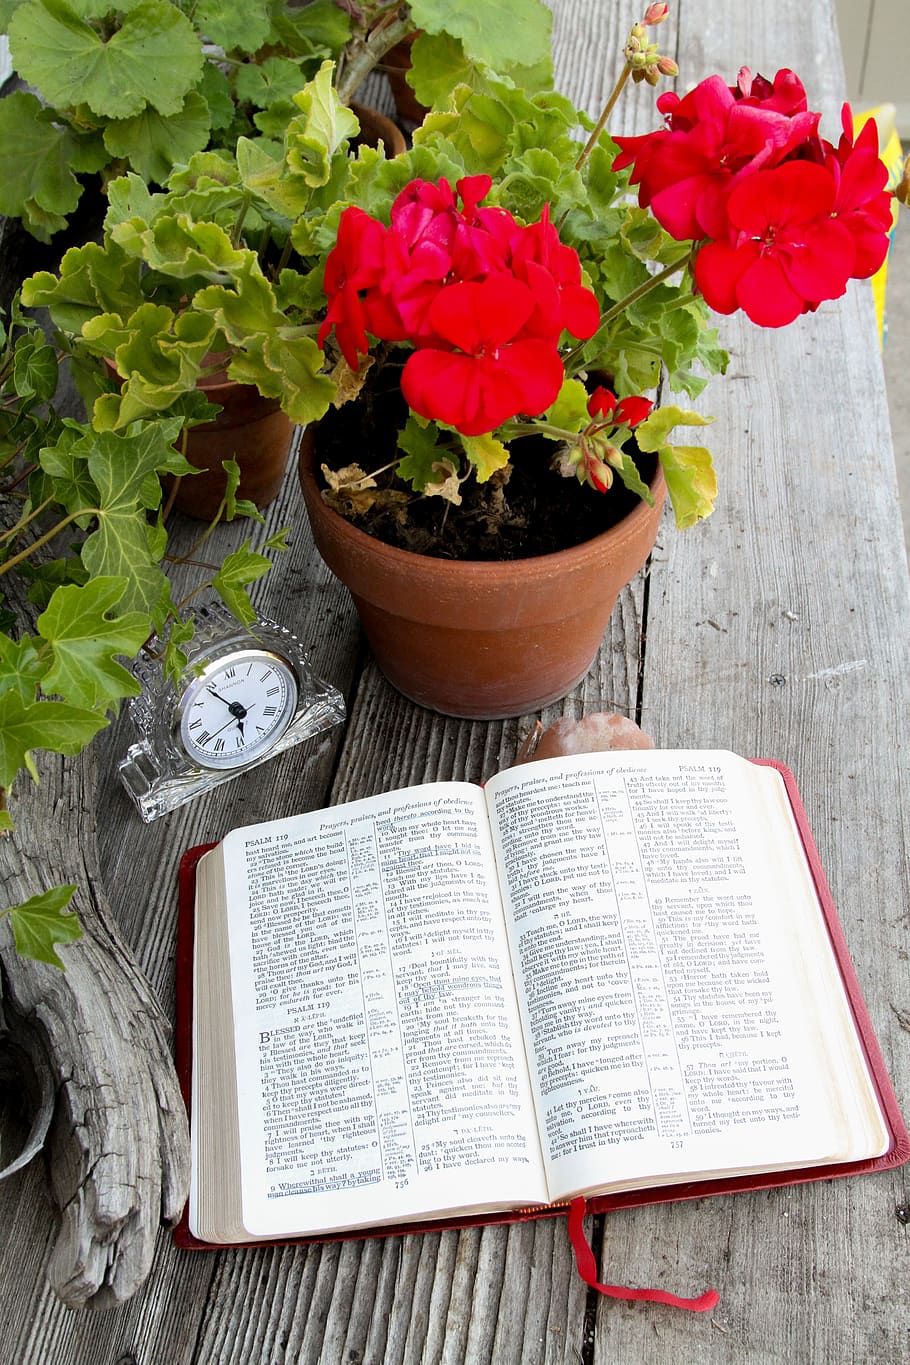 bible, open book, open bible, religion, christian, learning, scripture, red geranium, time, devotions